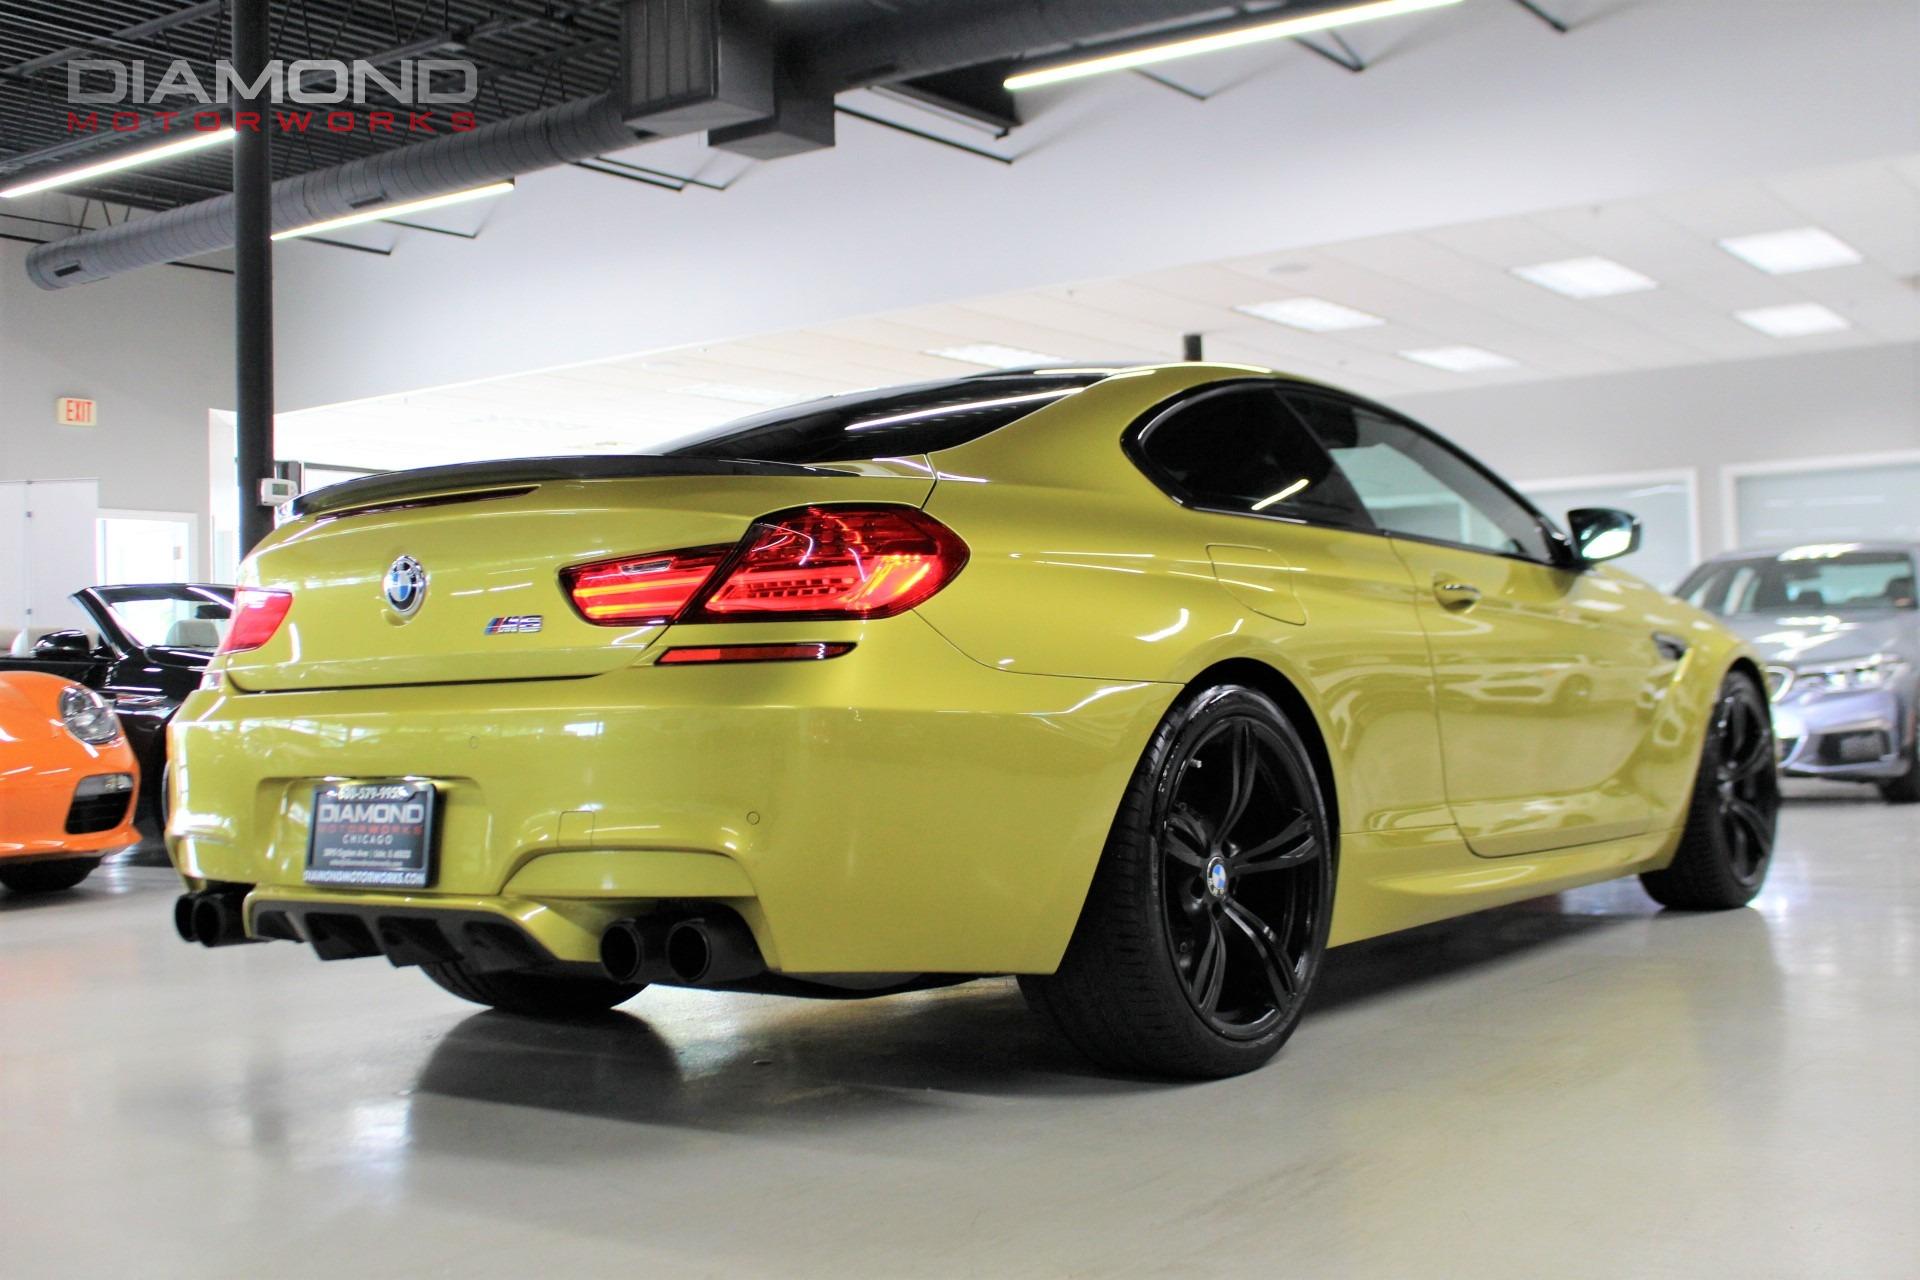 2016 BMW M6 Coupe Competition Edition